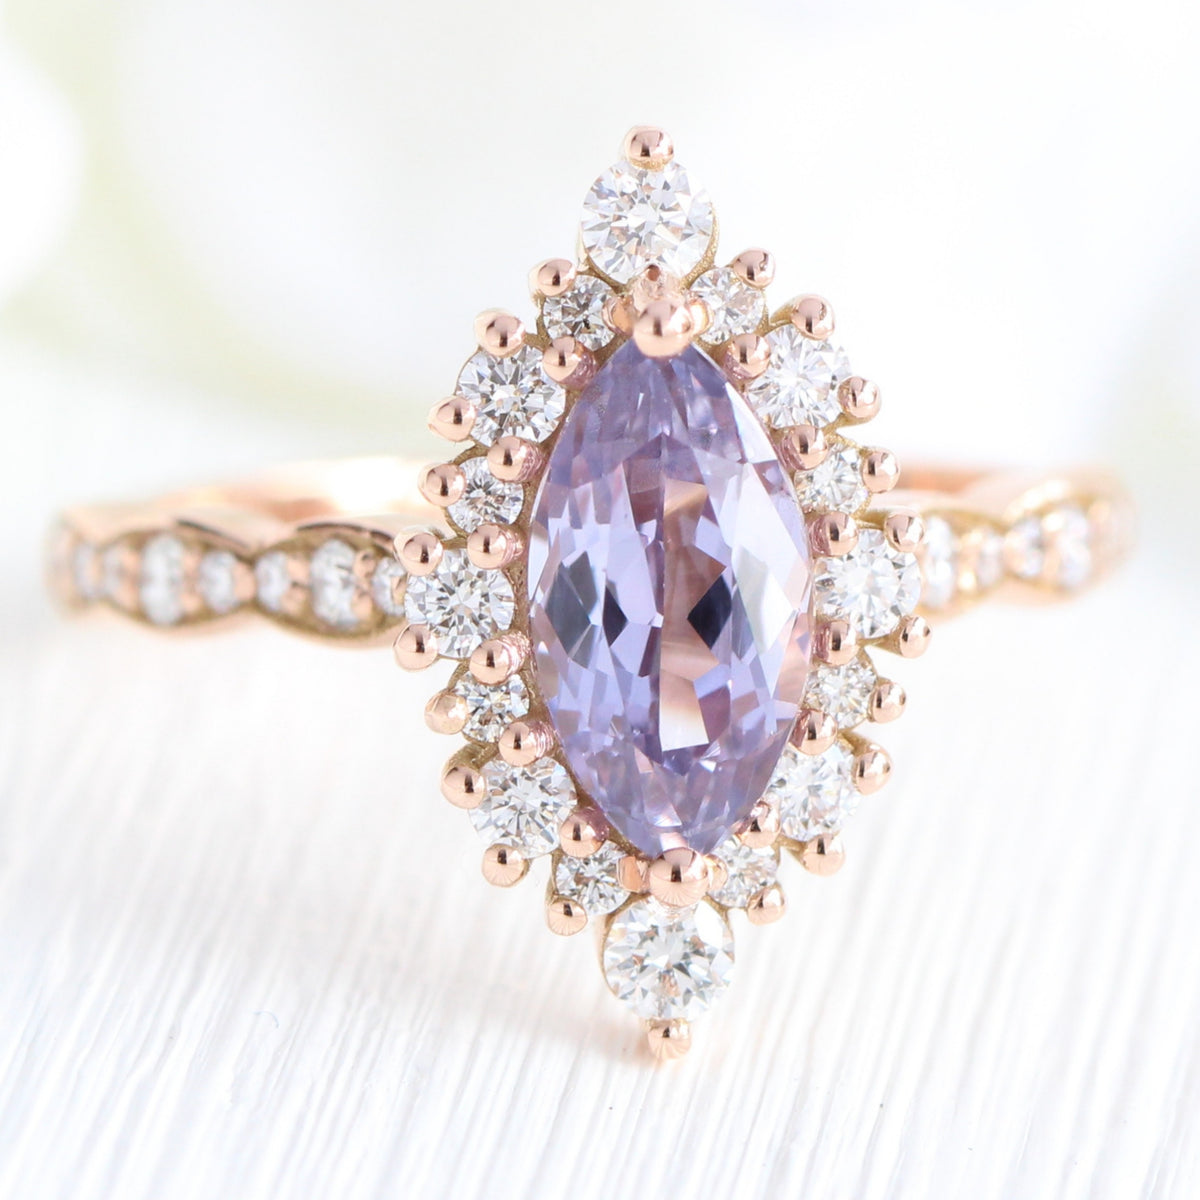 Lavender sapphire ring rose gold halo diamond marquise engagement ring la more design jewelry